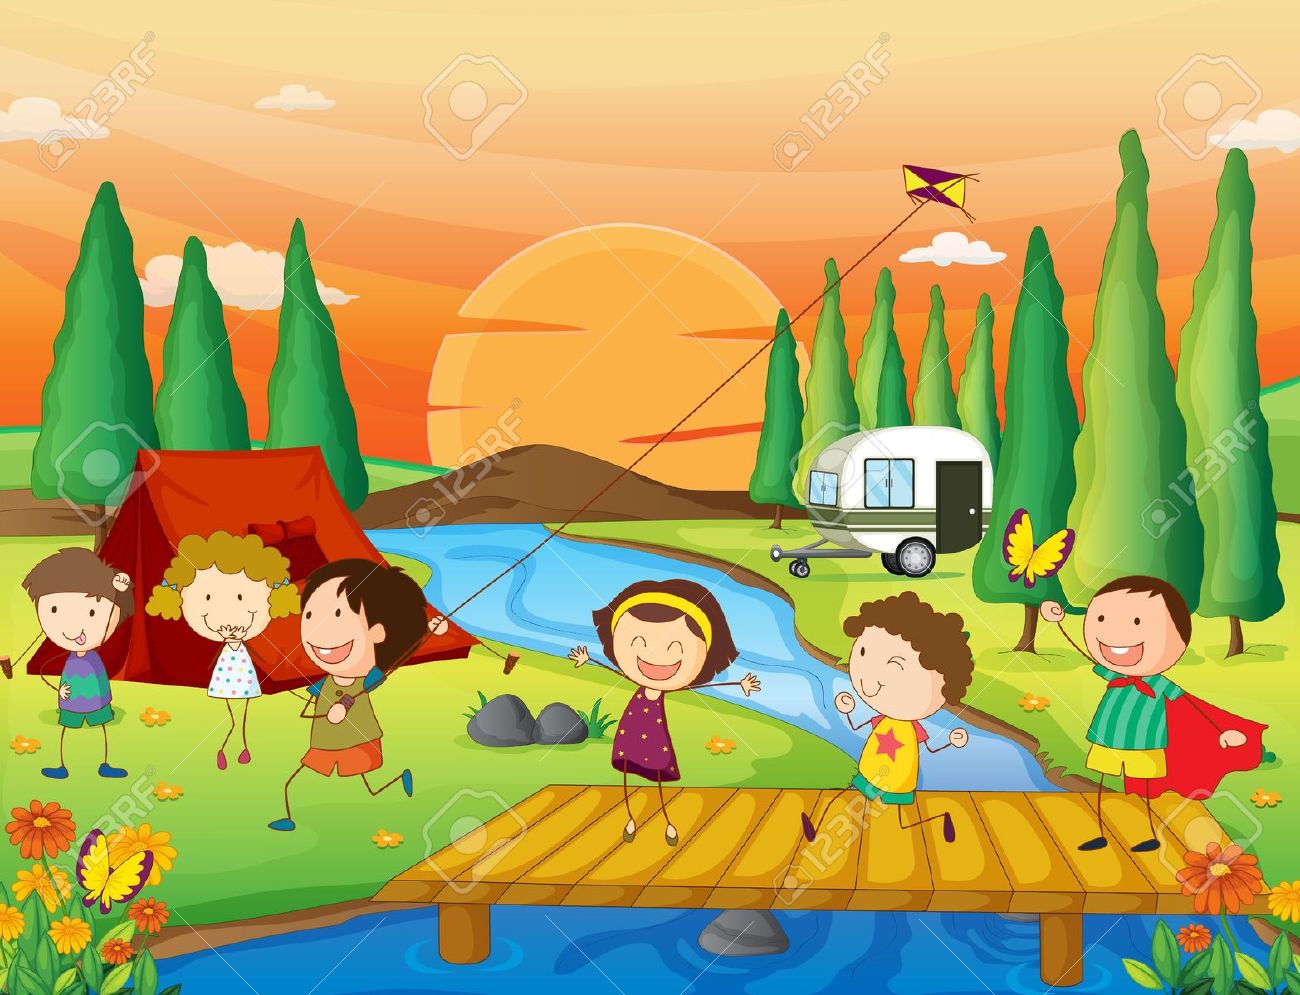 Illustration Of Kids Playing In Beautiful Nature Royalty Free.